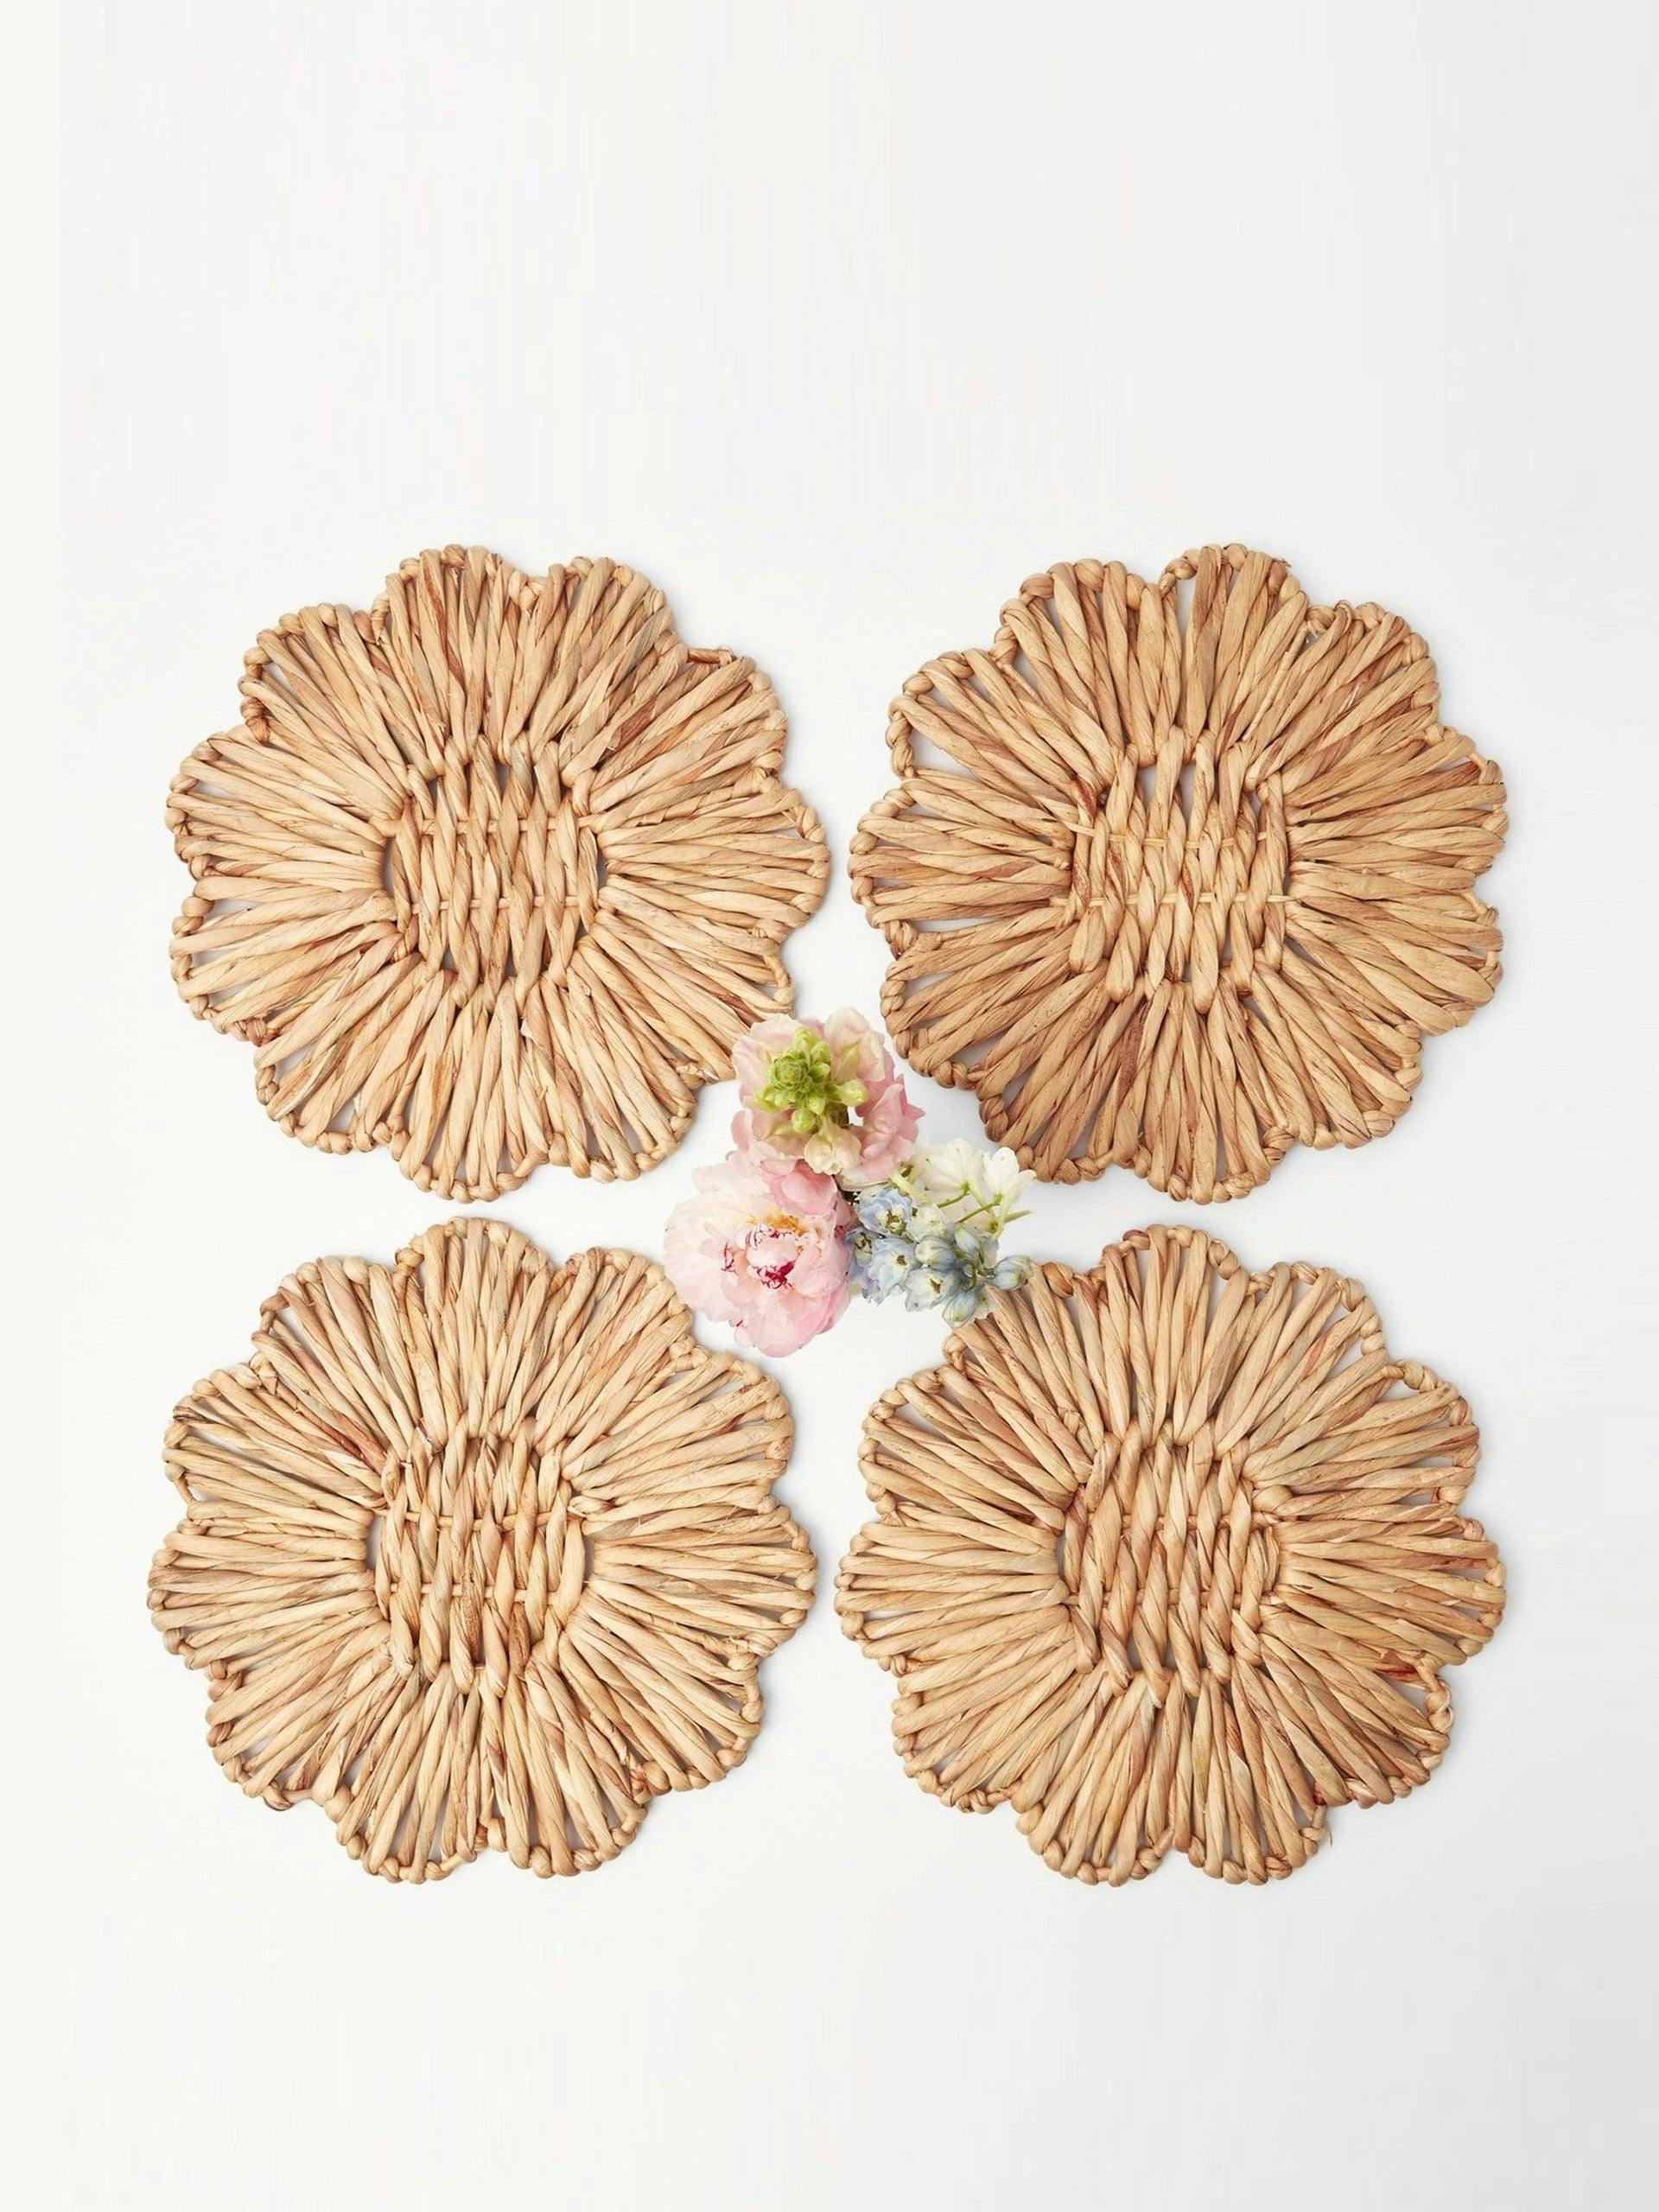 Rattan flower placemats (set of 4)